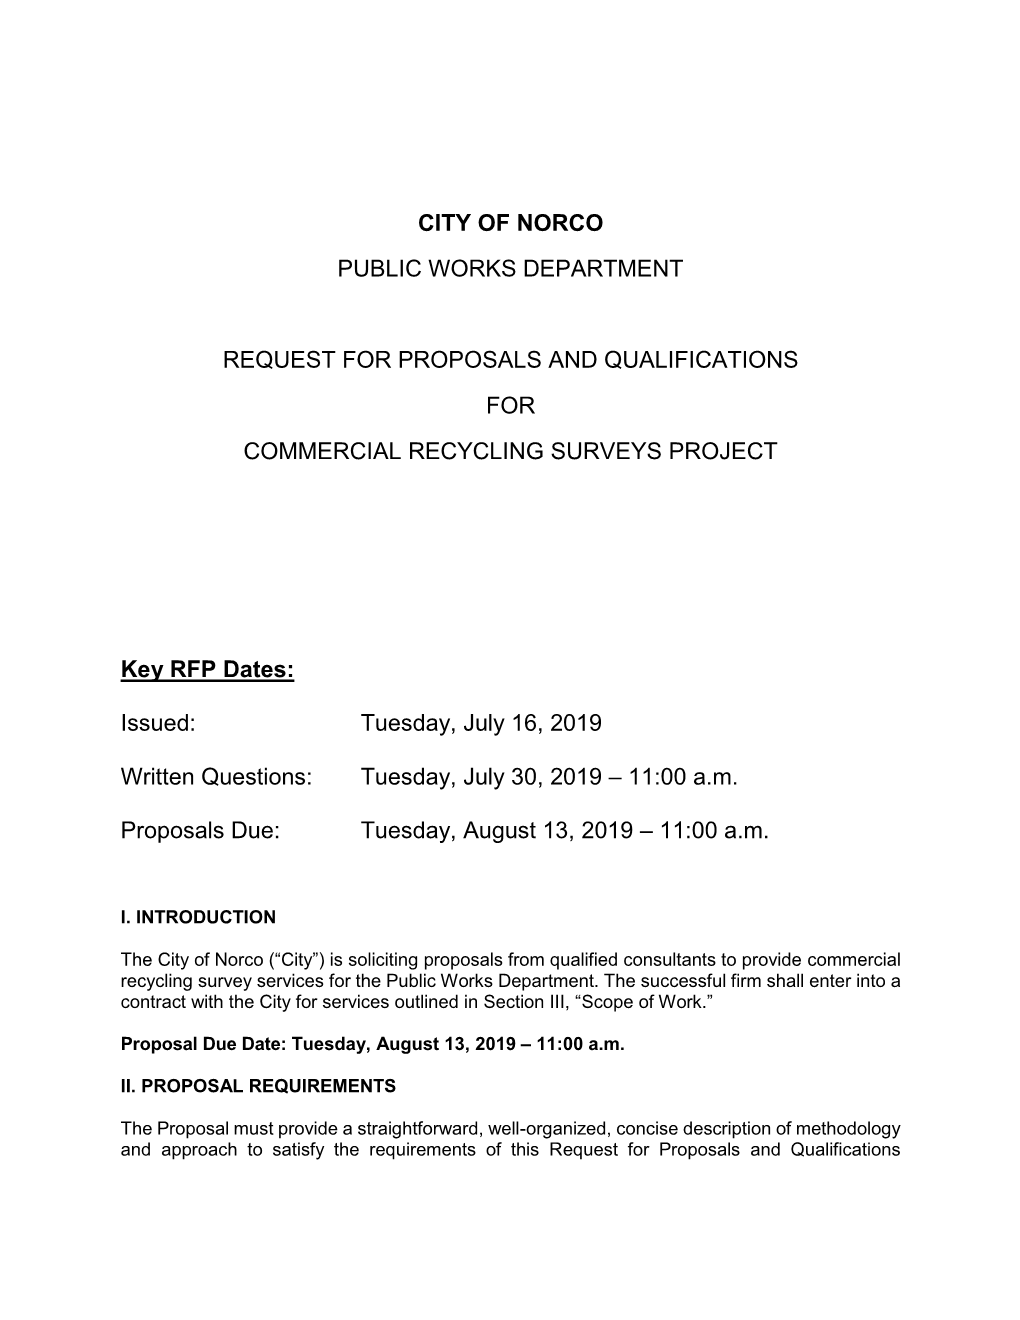 City of Norco Public Works Department Request For